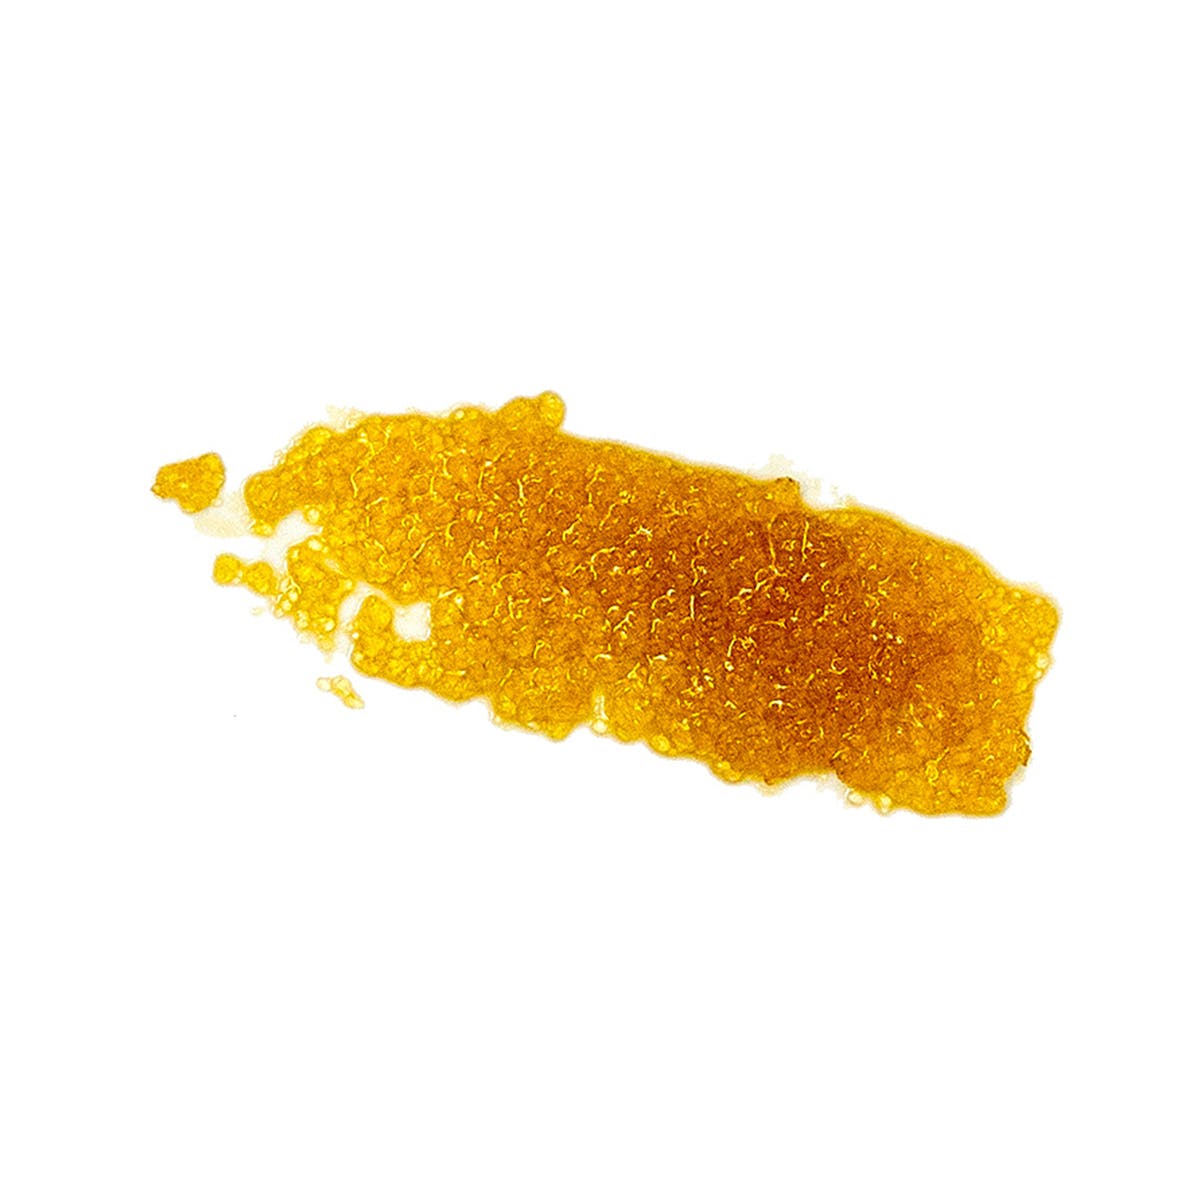 Loudpack Live Resin - Pacific Frost